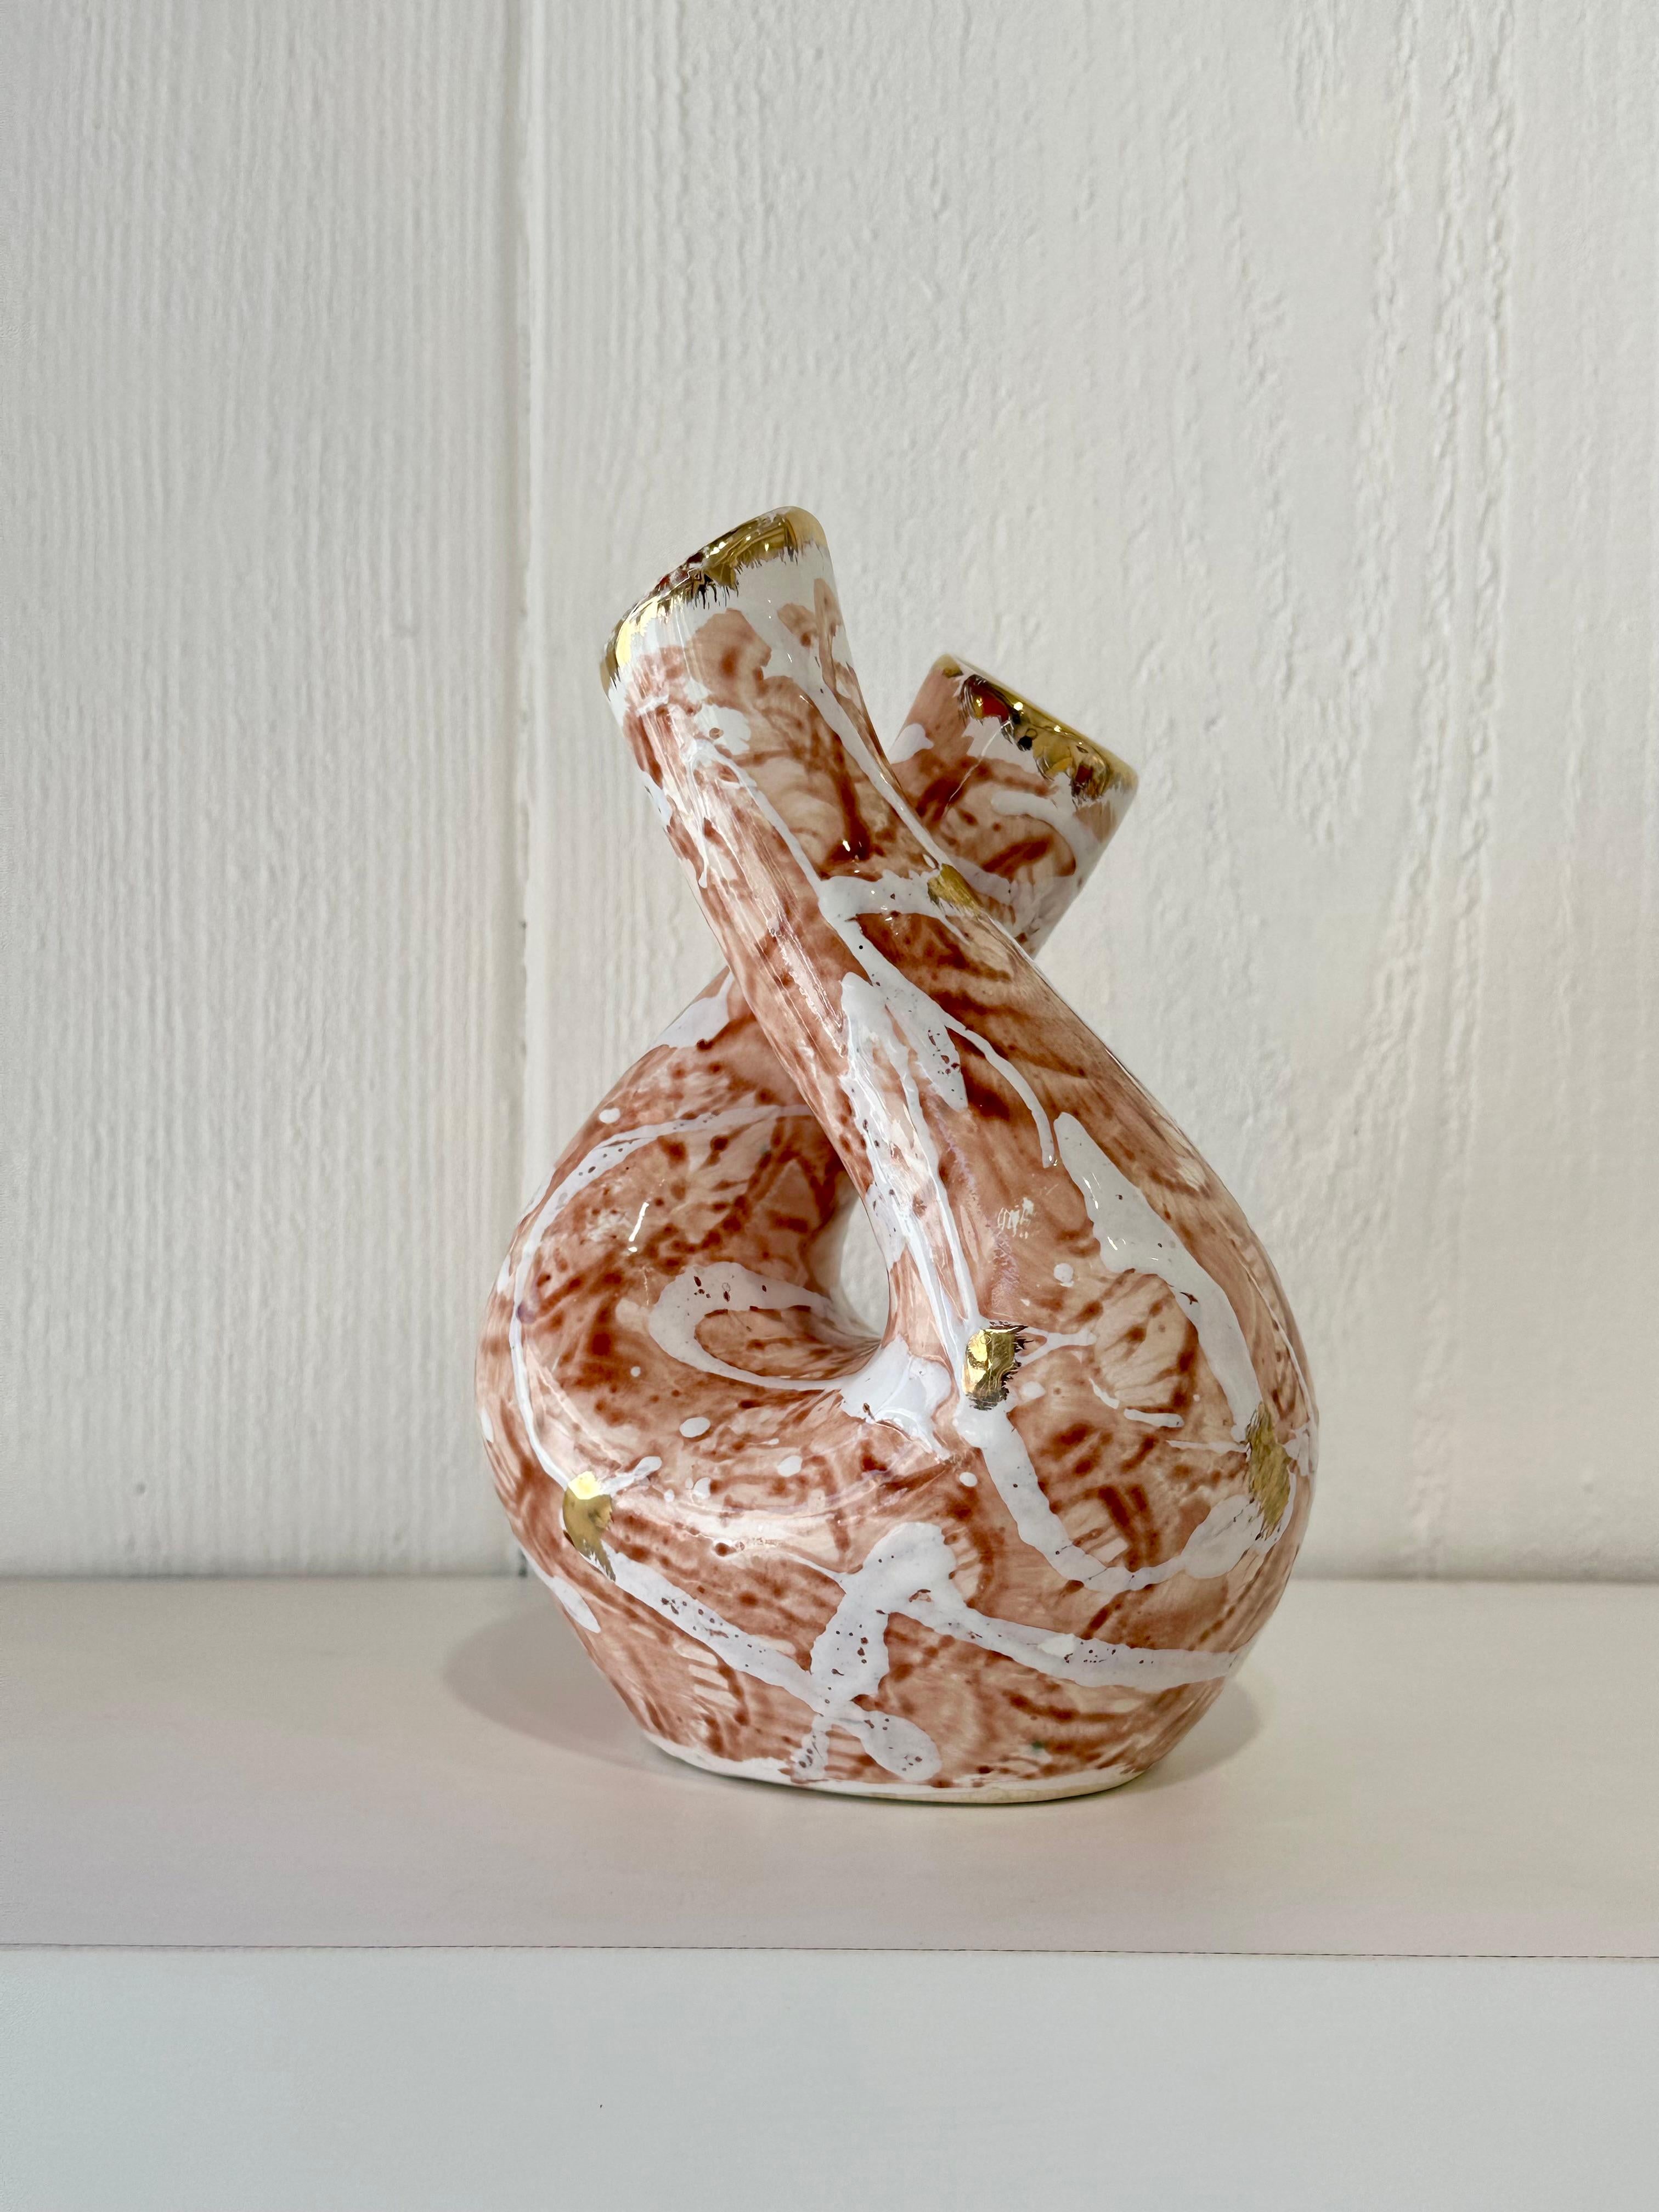 This Brazilian ceramic vase, dating from about 1950, is a real work of art. Its enamelled polychrome ceramic gives it a timeless beauty. With dimensions of 20 x 15 x 11 cm, it is distinguished by its small size that makes it an object easy to